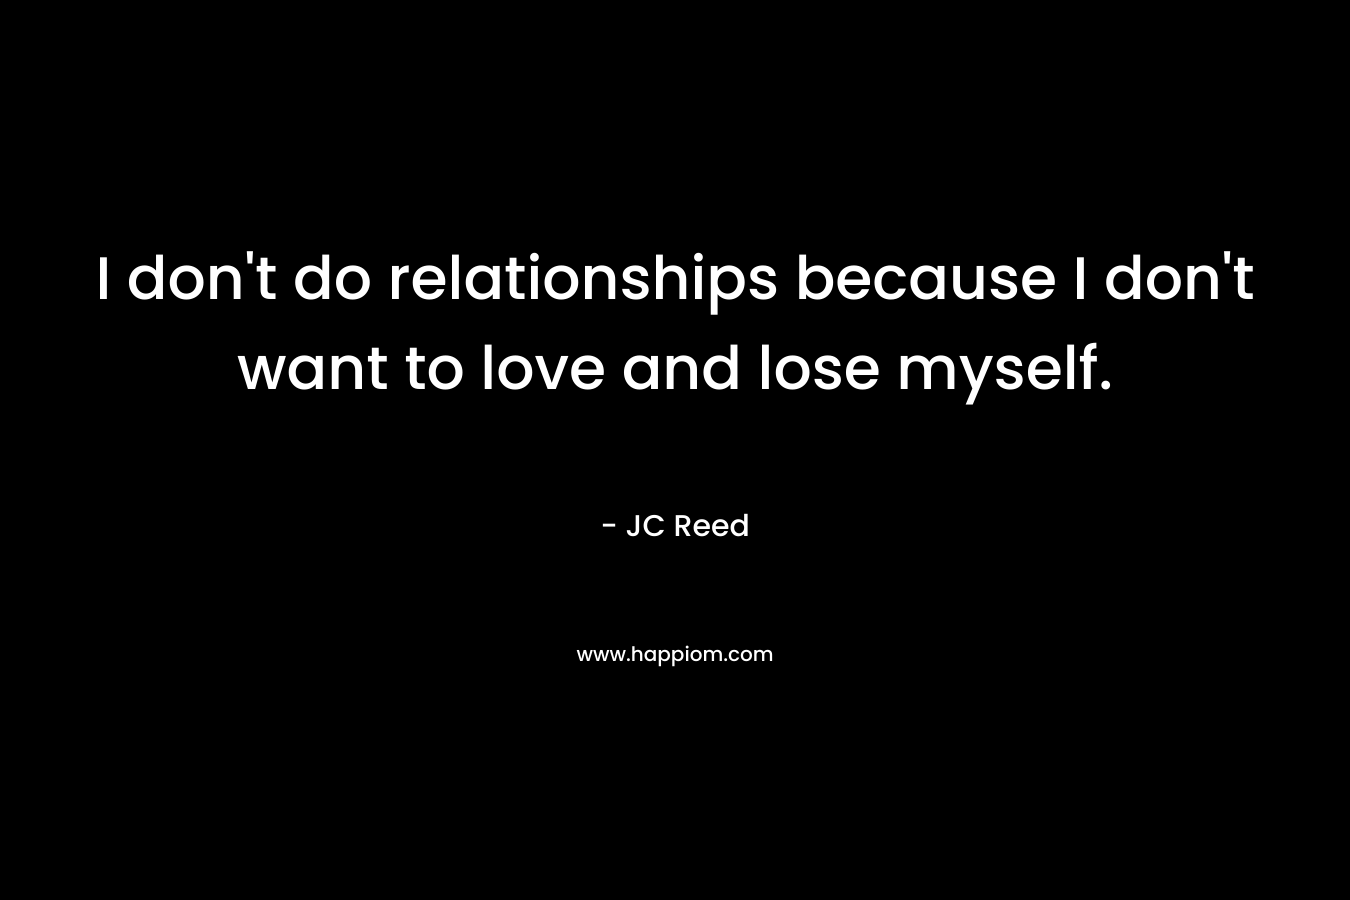 I don’t do relationships because I don’t want to love and lose myself. – JC Reed